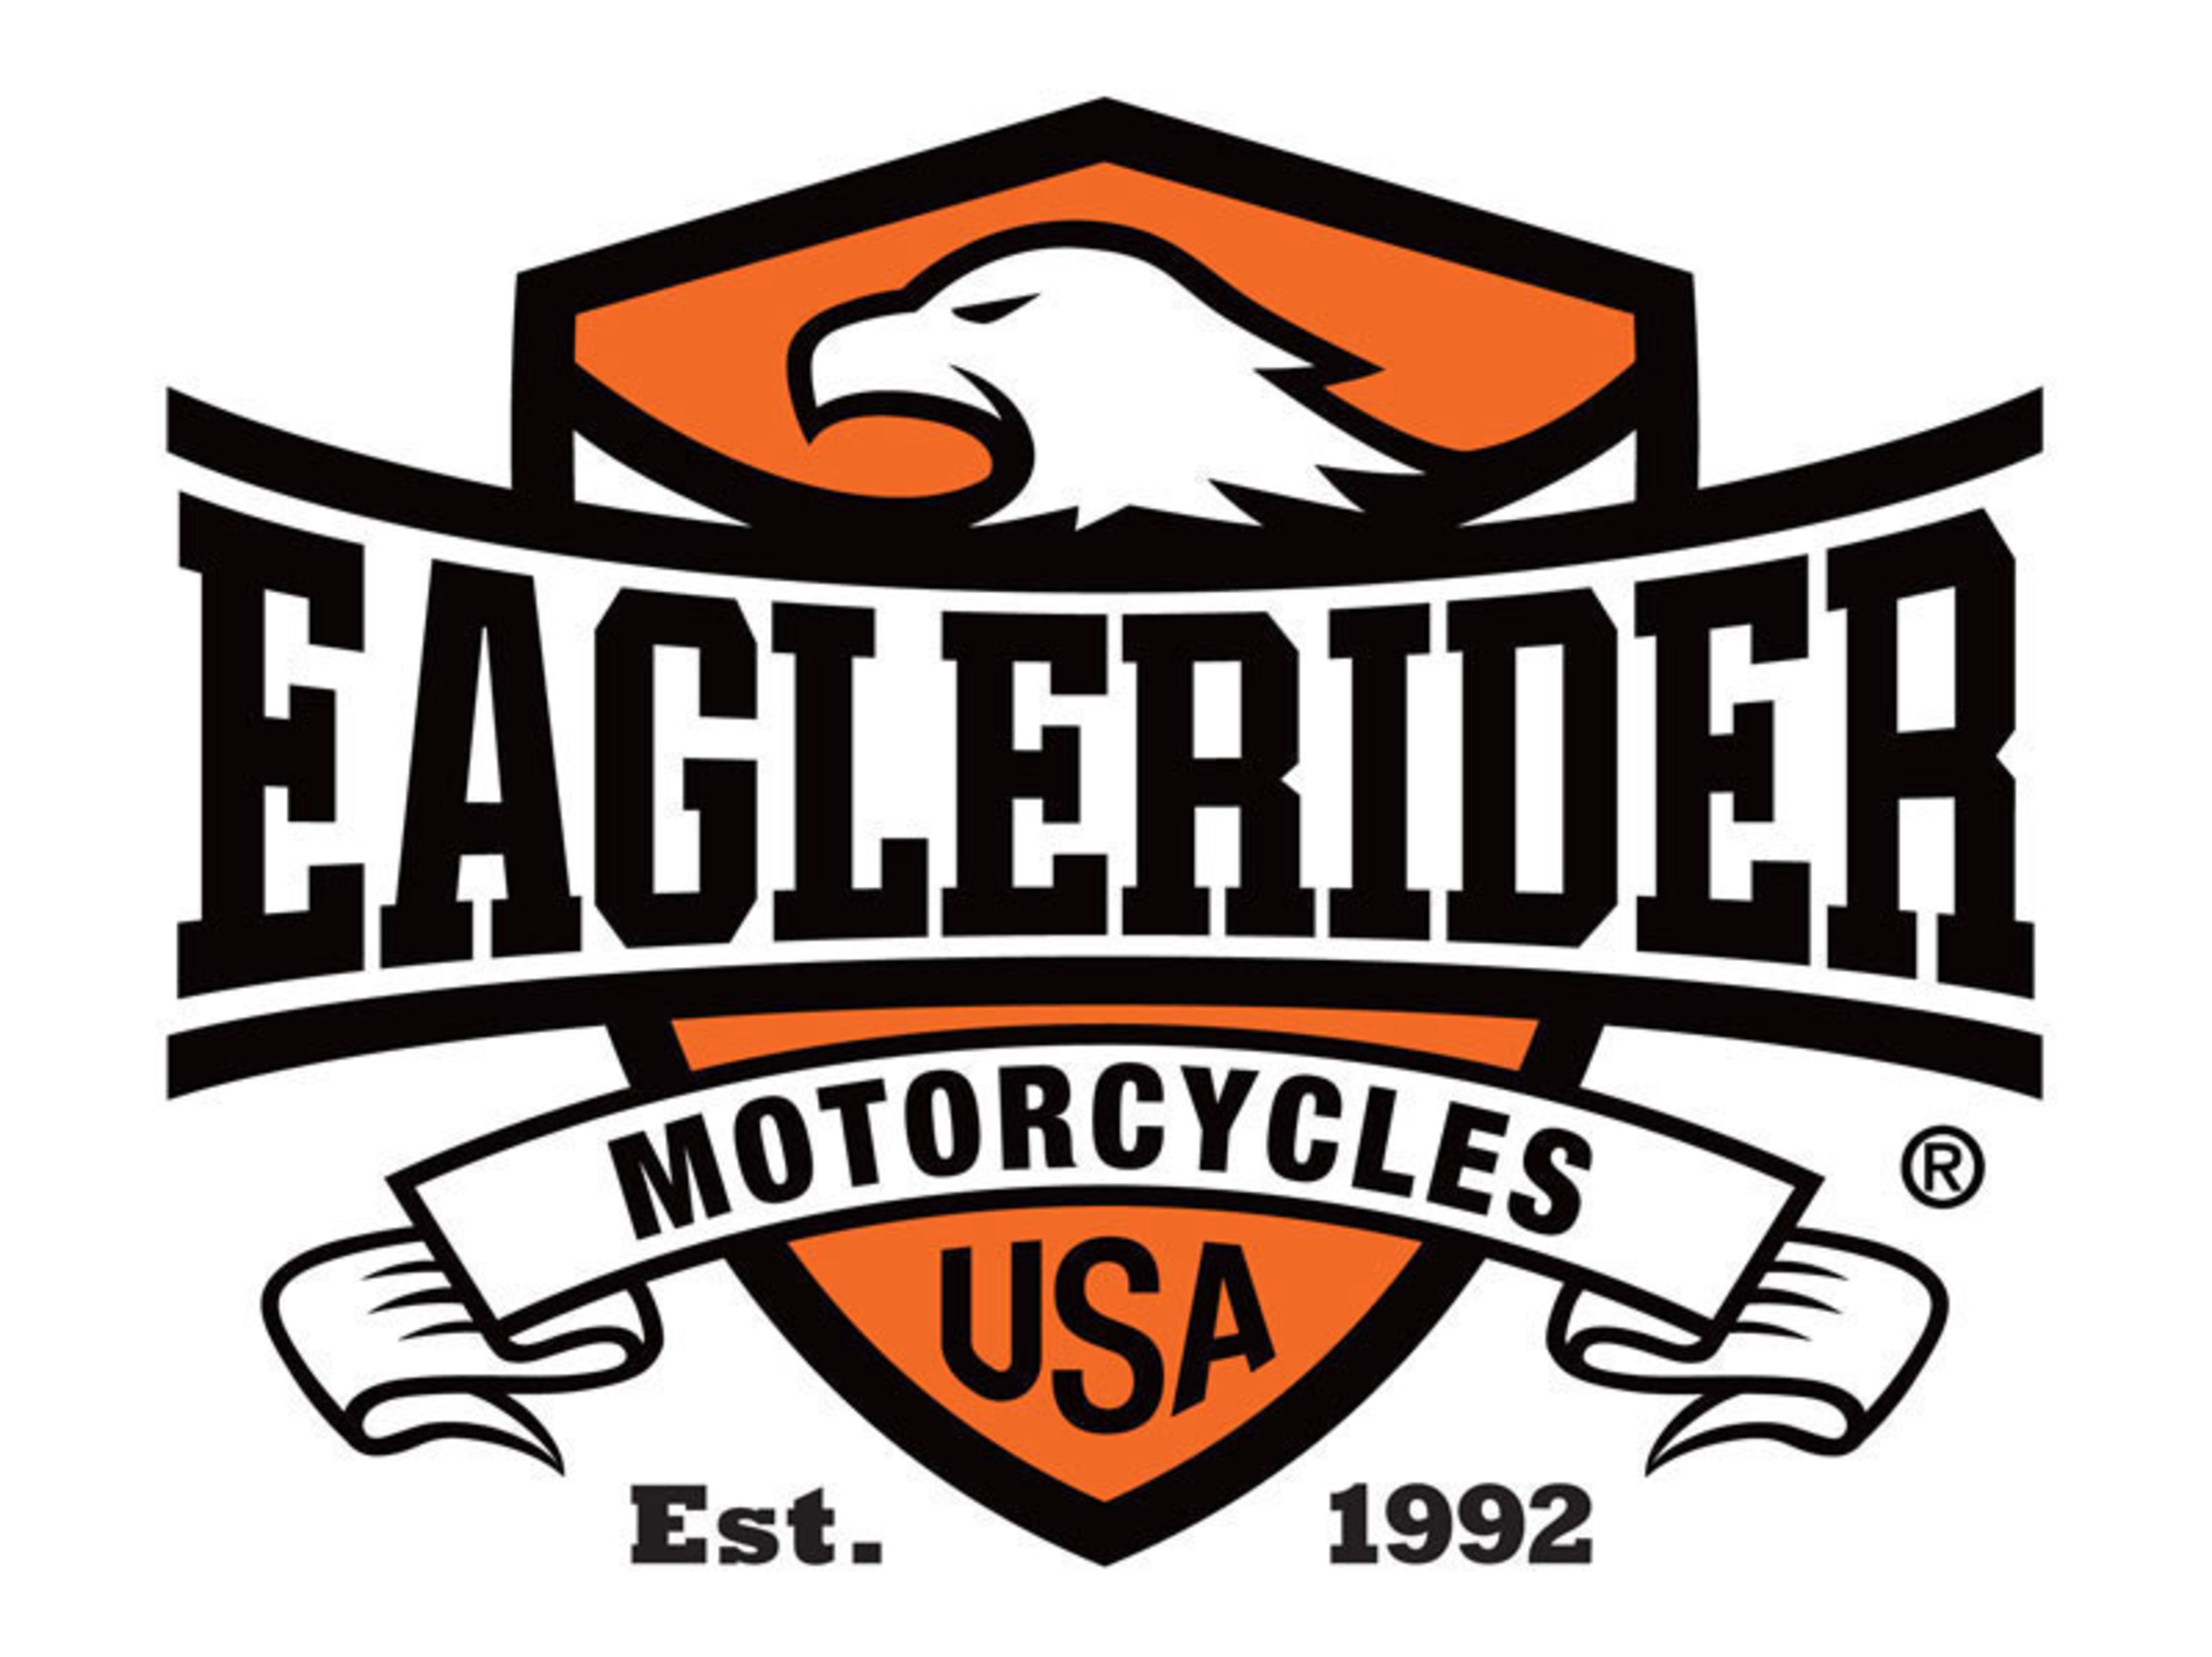 EagleRider, the world's innovator and leading provider of motorcycle experiences. (PRNewsFoto/EagleRider) (PRNewsFoto/EagleRider)